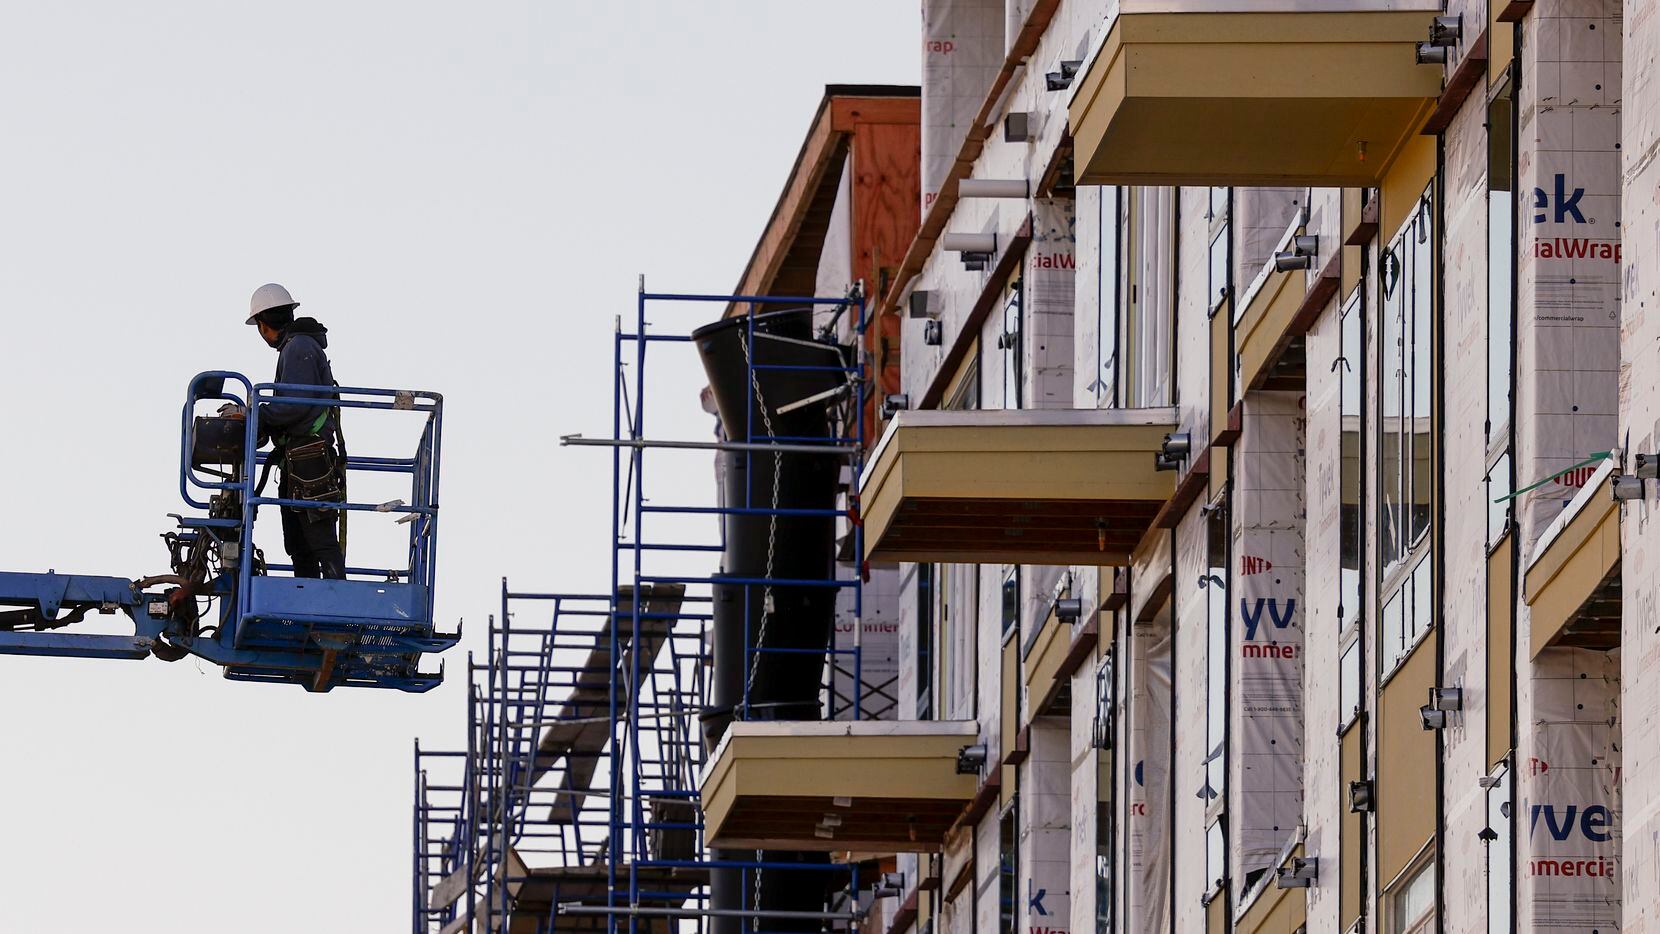 More than 63,000 apartments are under construction in North Texas.